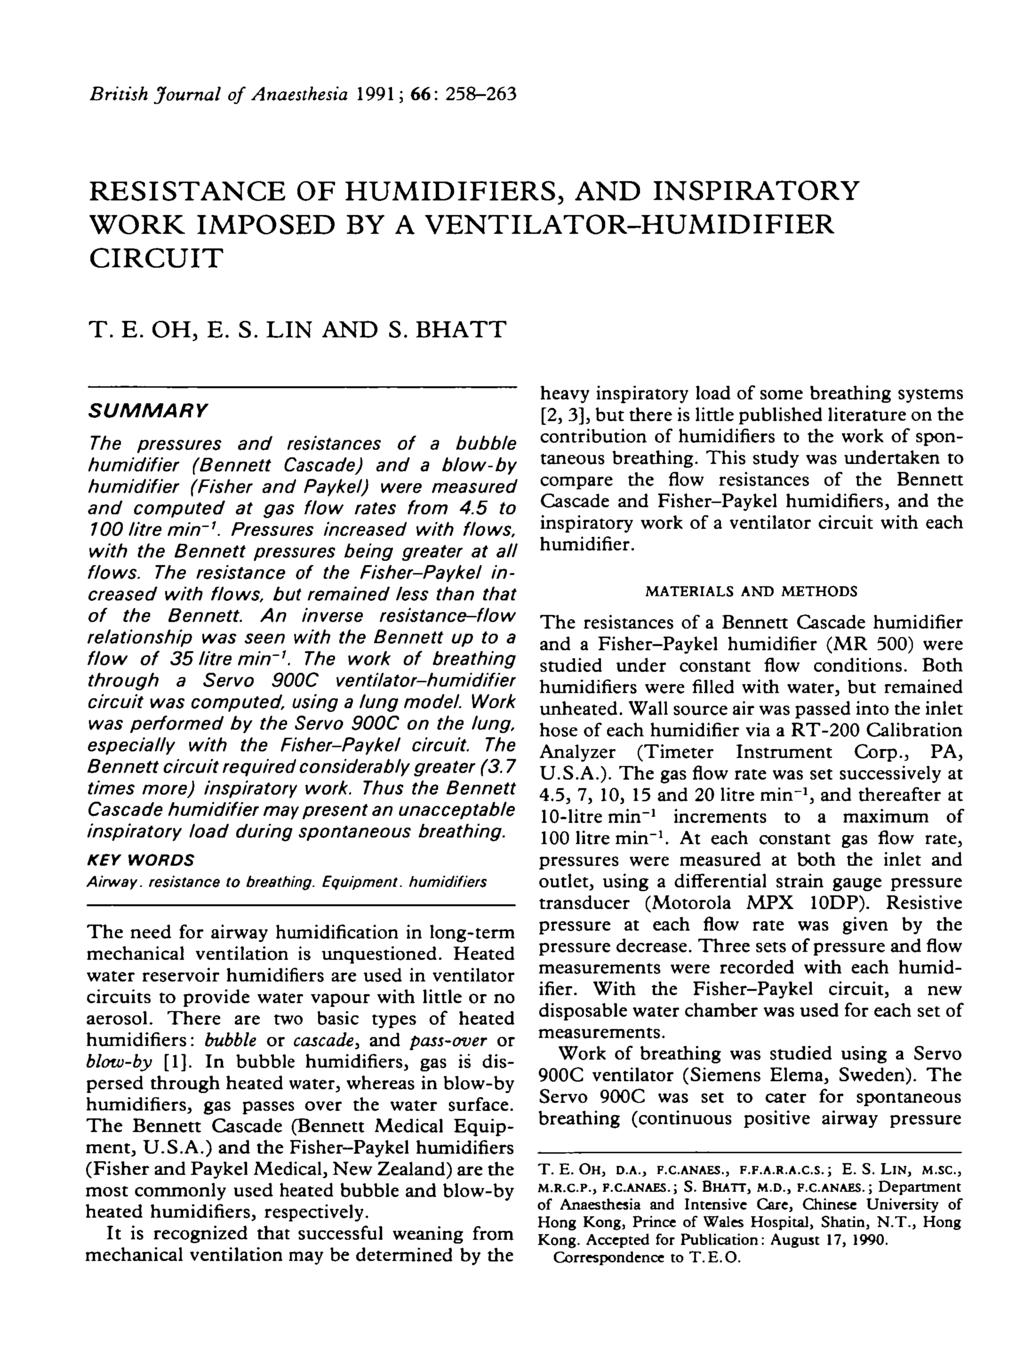 British Journal of Anaesthesia 1991; 66: 258-263 RESISTANCE OF HUMIDIFIERS, AND INSPIRATORY WORK IMPOSED BY A VENTILATOR-HUMIDIFIER CIRCUIT T. E. OH, E. S. LIN AND S.